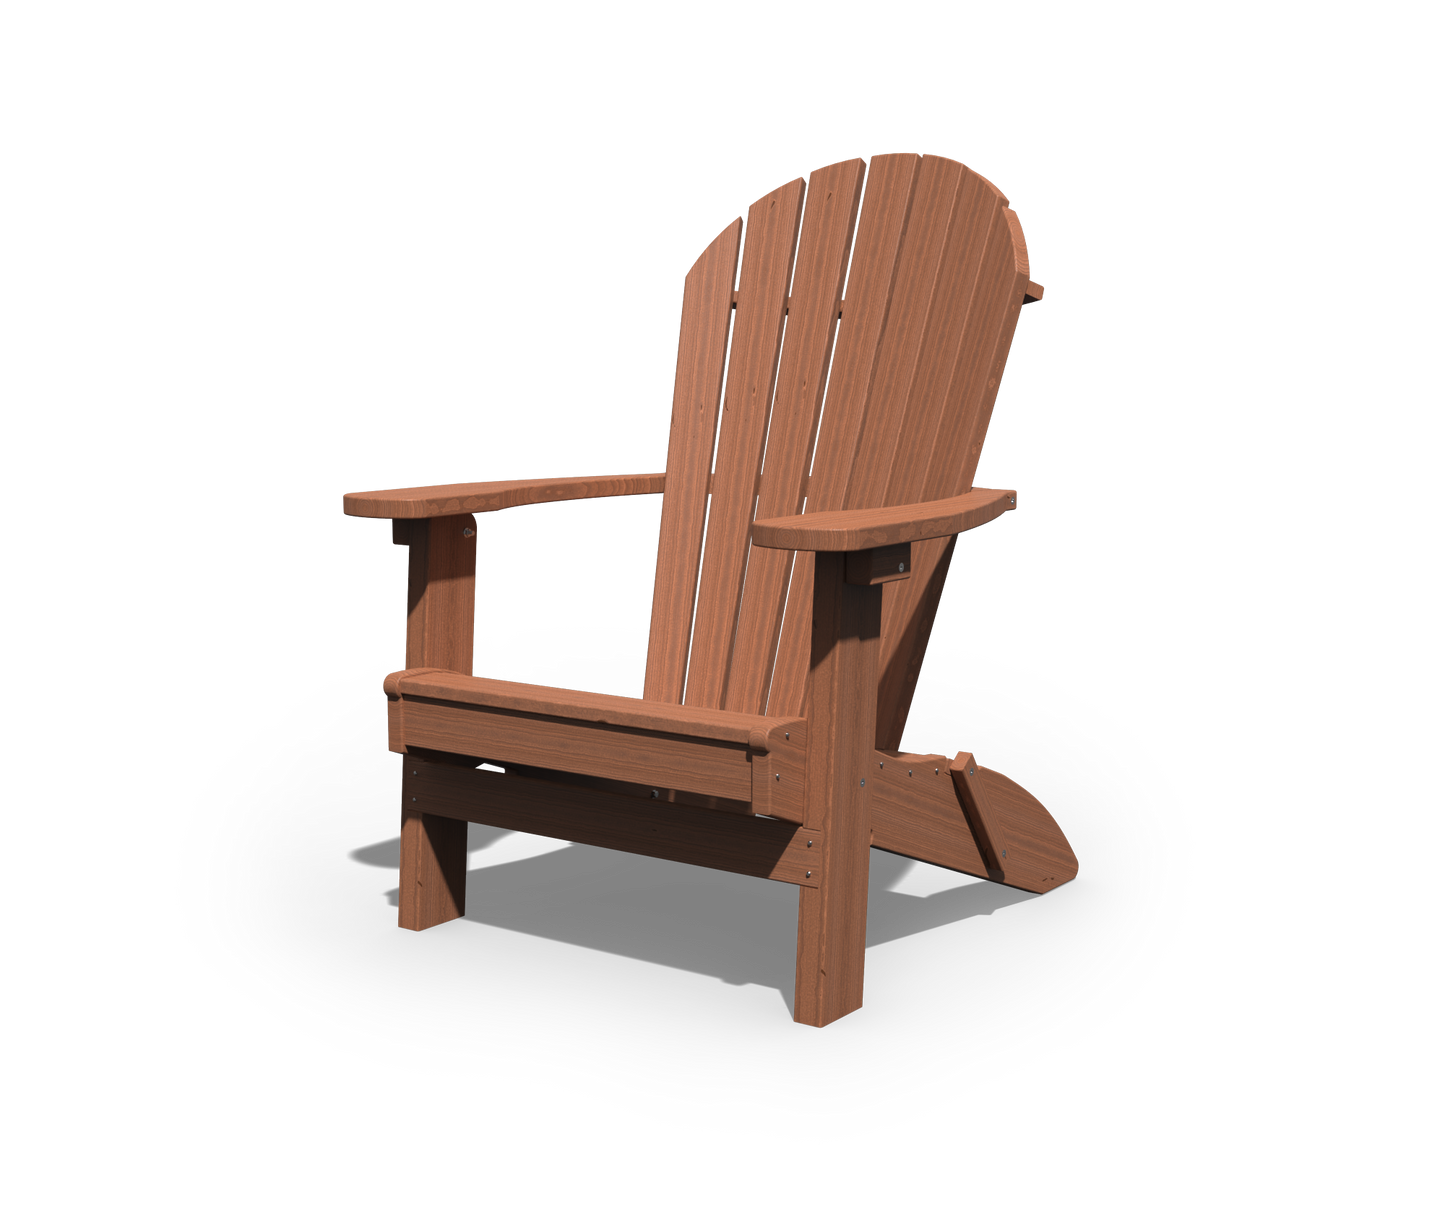 Patiova Amish Crafted Pressure Treated Pine Folding Adirondack Chair - LEAD TIME TO SHIP 3 WEEKS